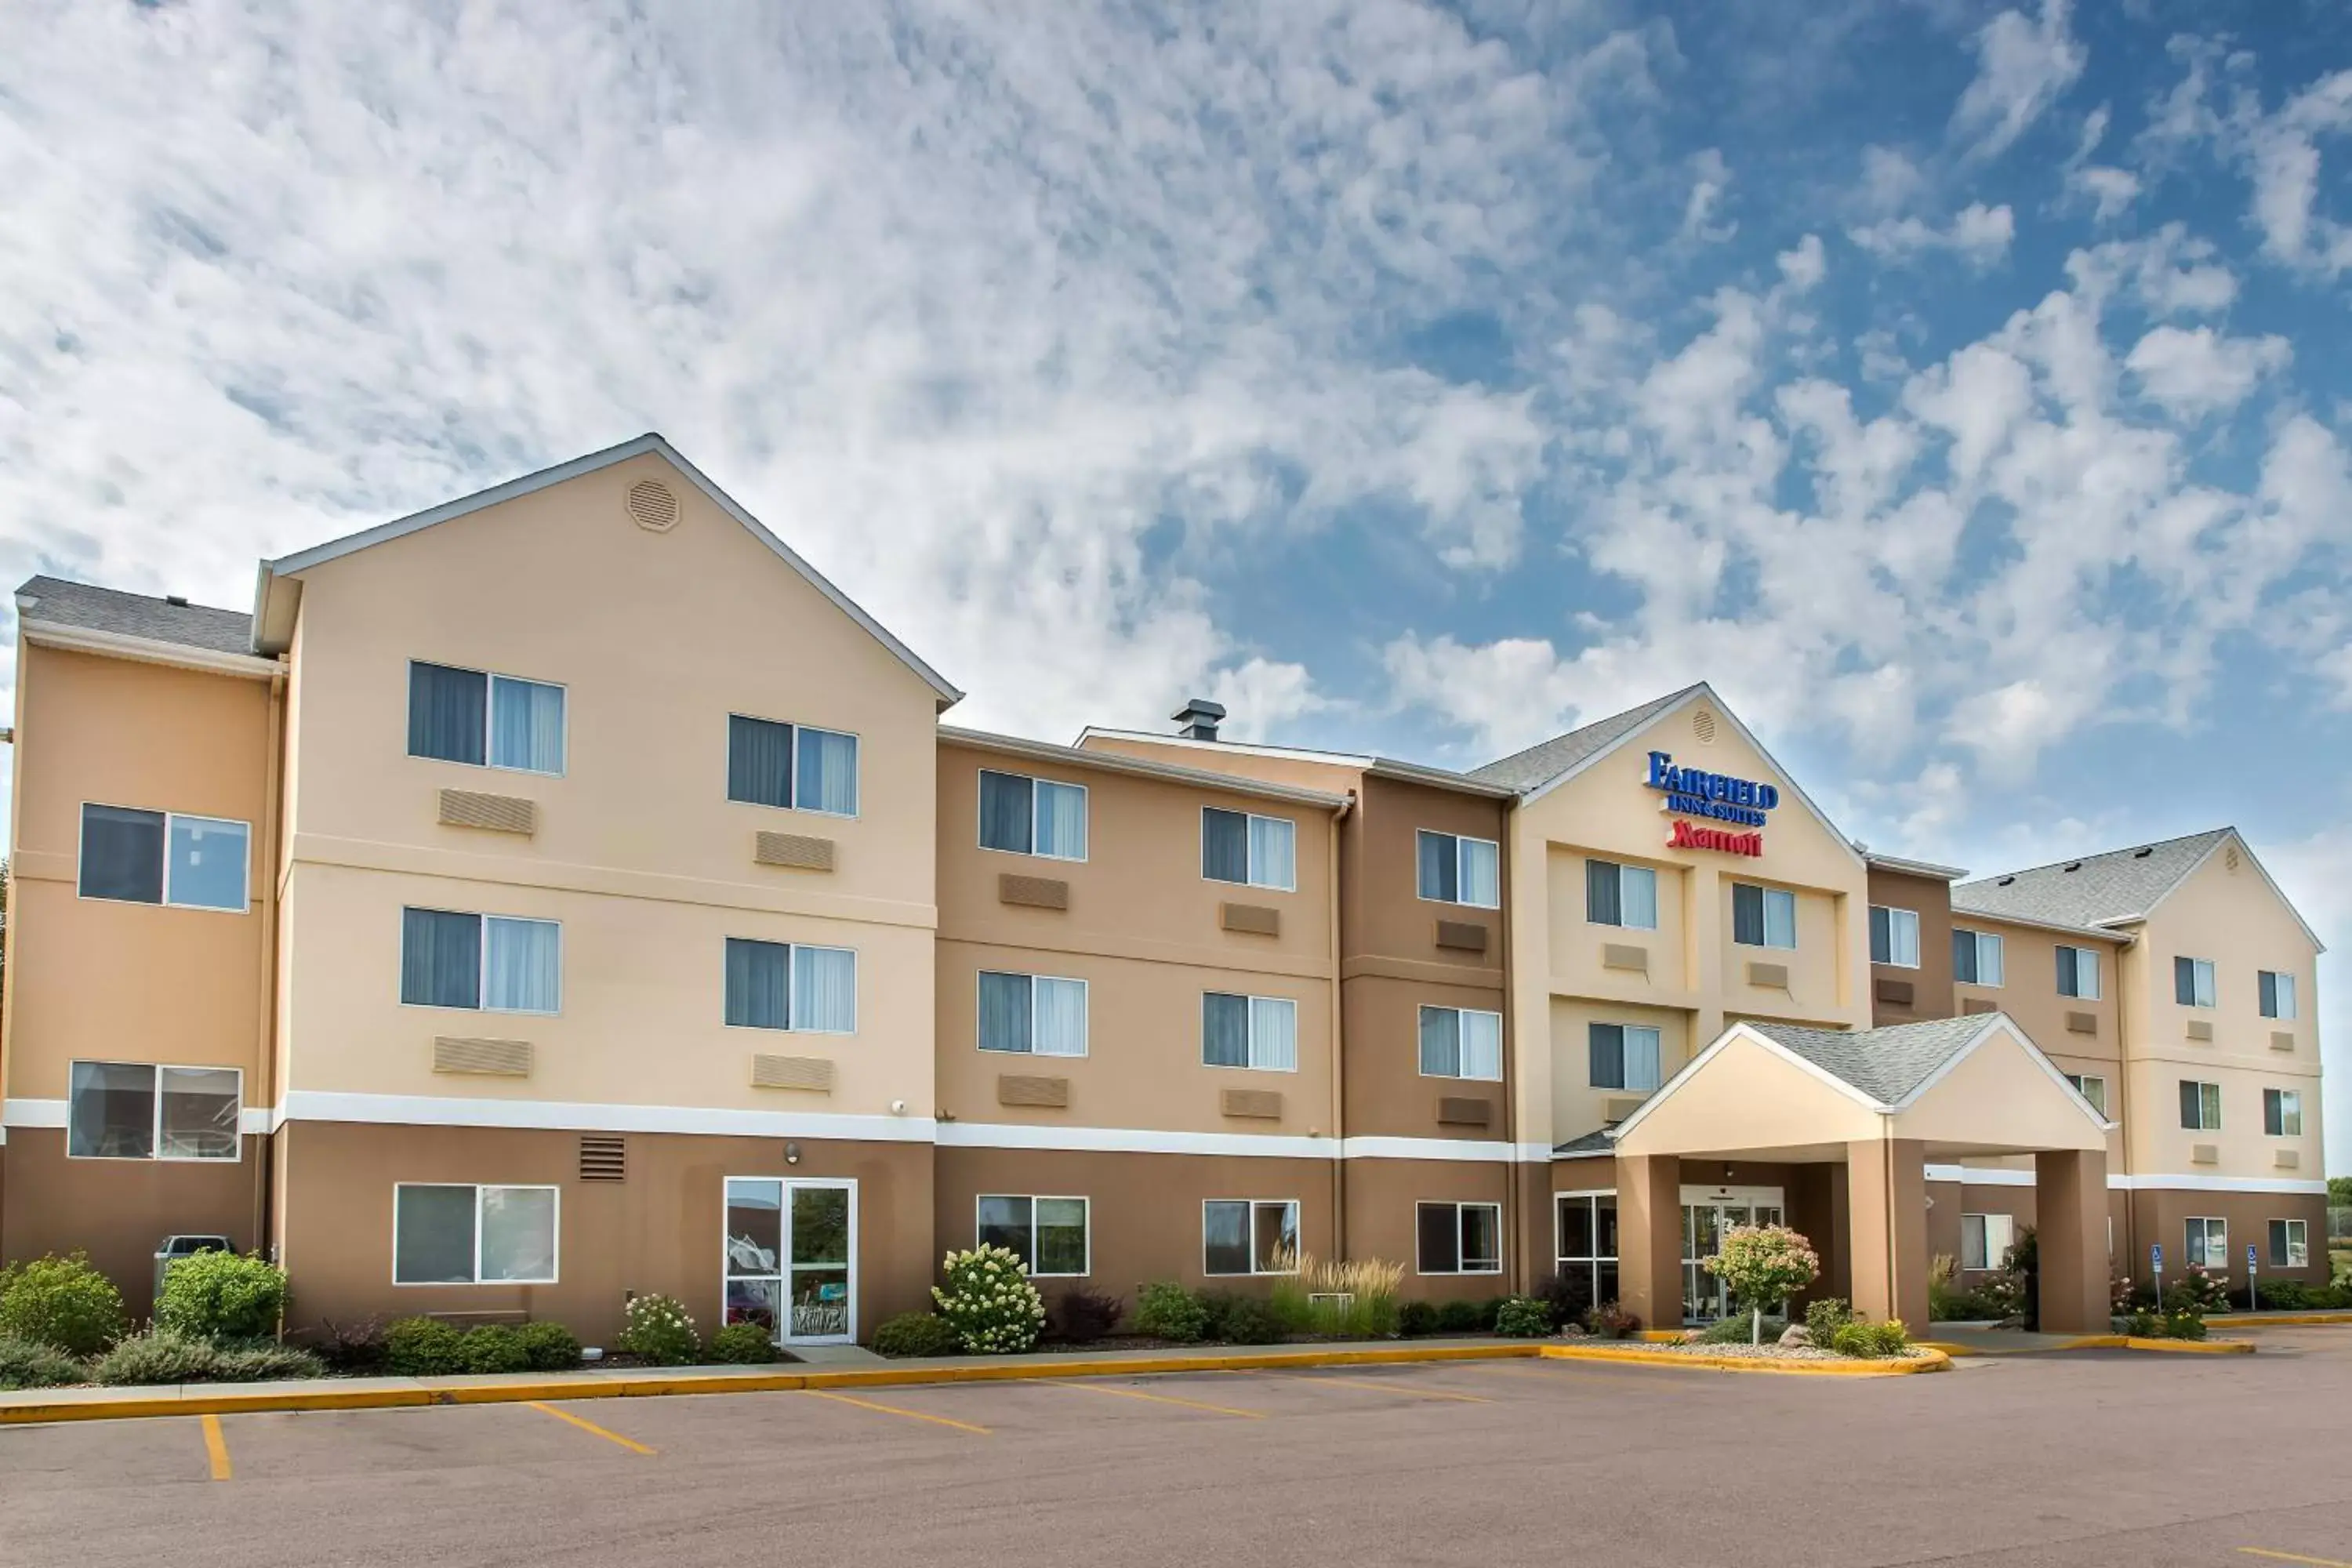 Property Building in Fairfield Inn & Suites Sioux Falls